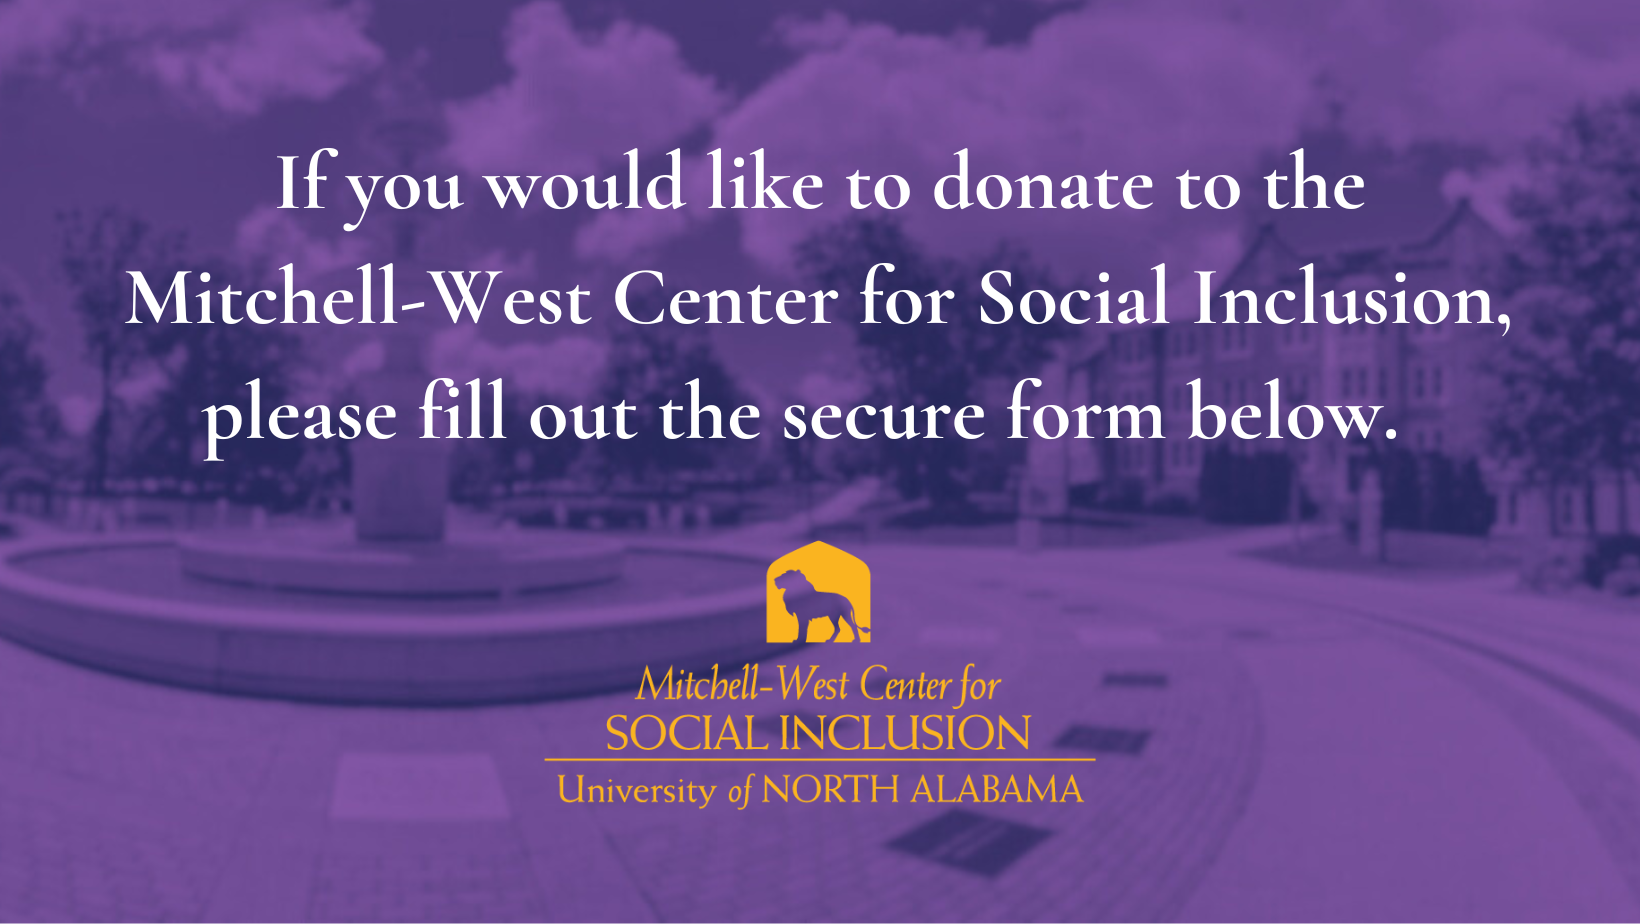 If you would like to donate to the Mitchell-West Center for Social Inclusion, please use the secure form below.